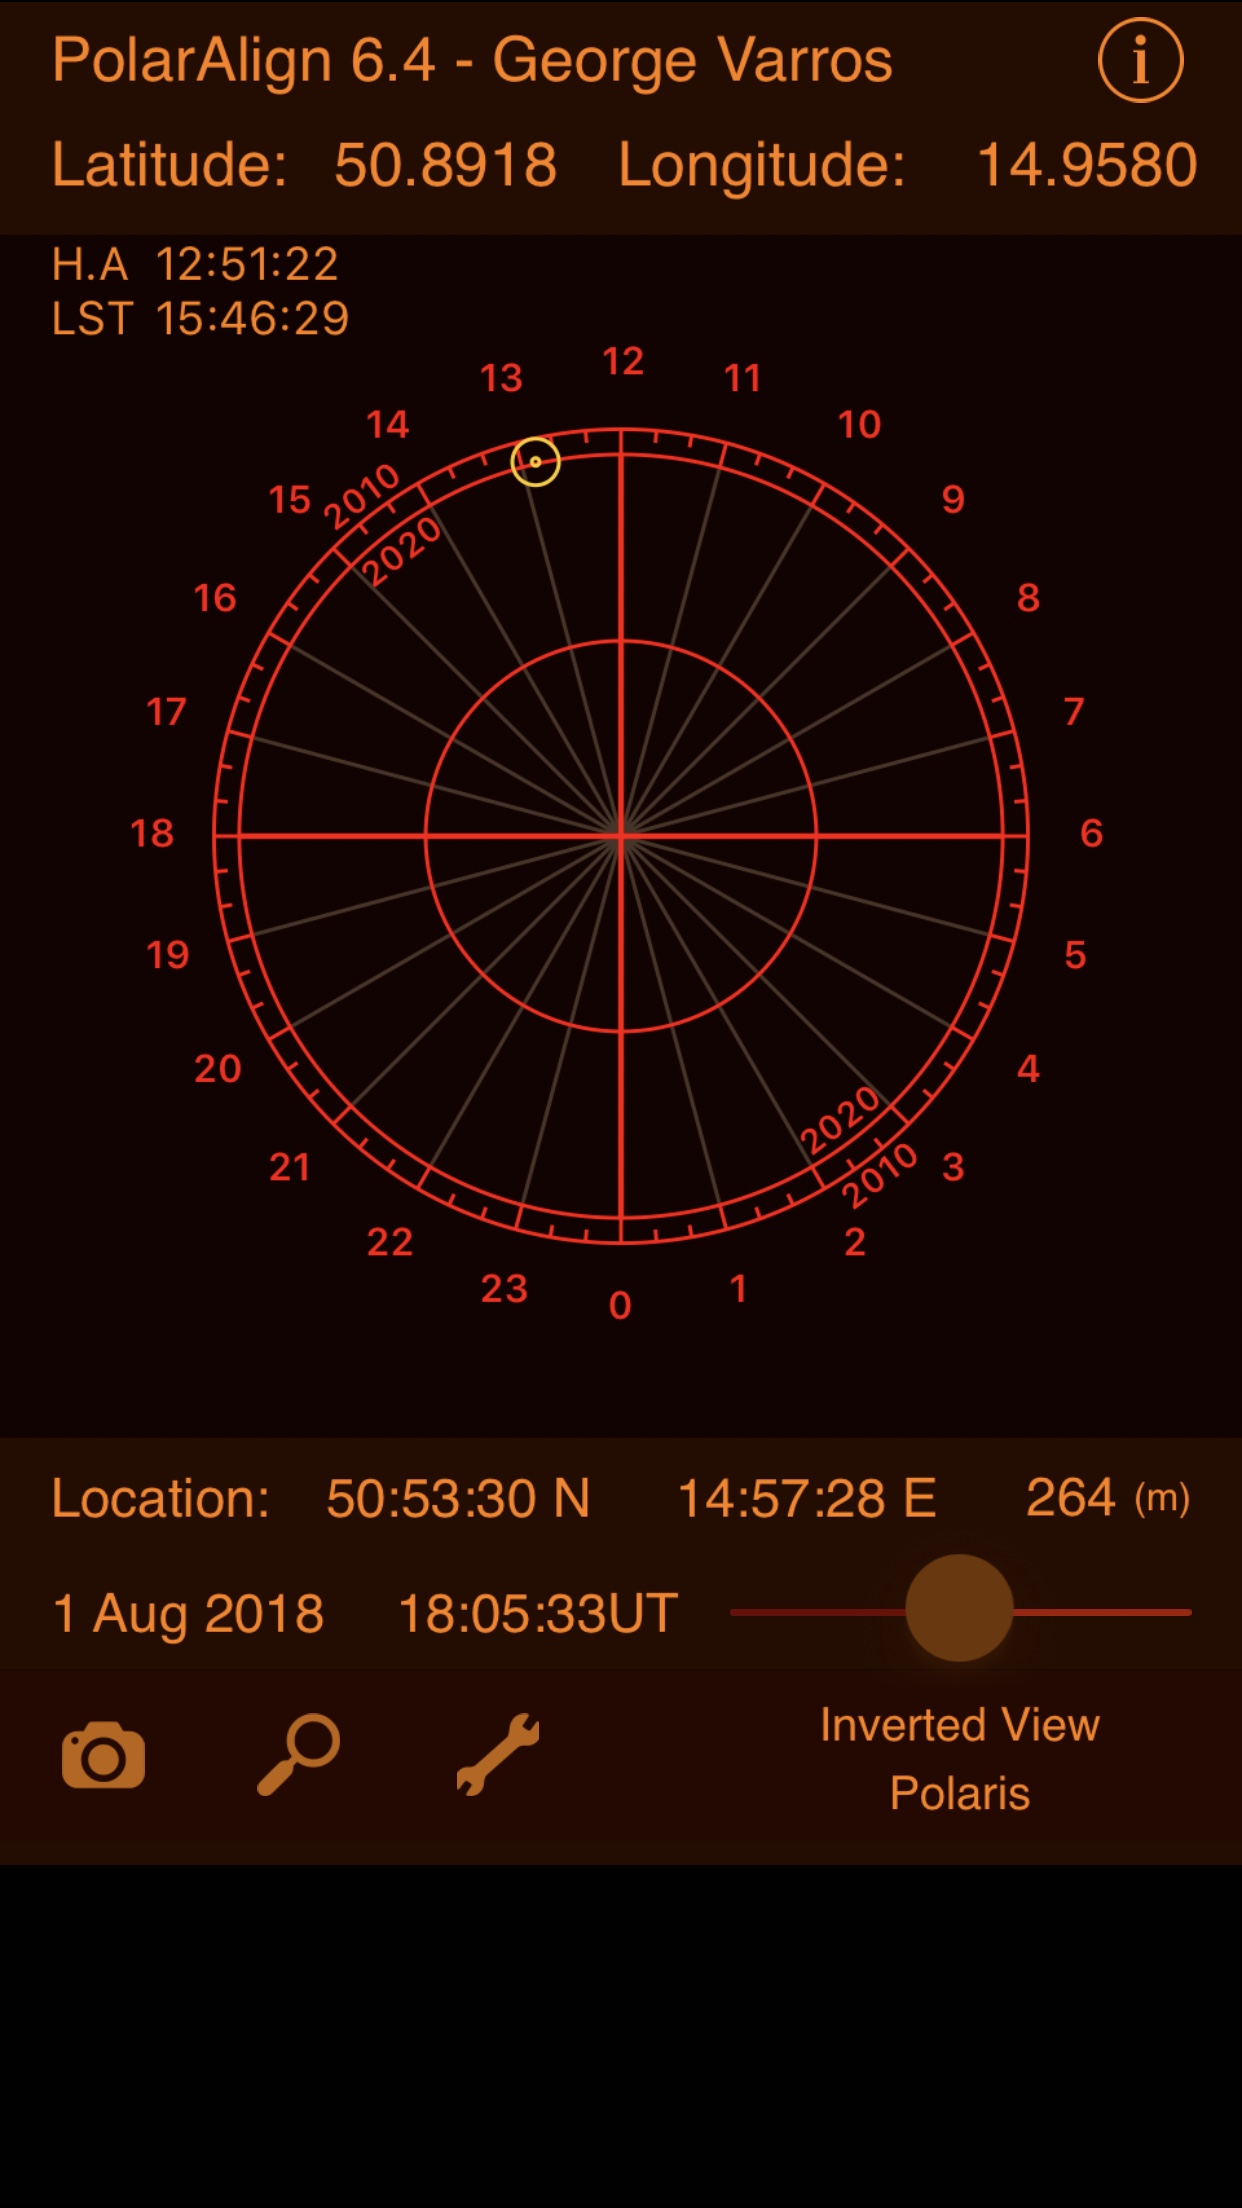 Polar aligning with PolarAlign iOS app screenshot. One of the best astronomy apps for iPhone.